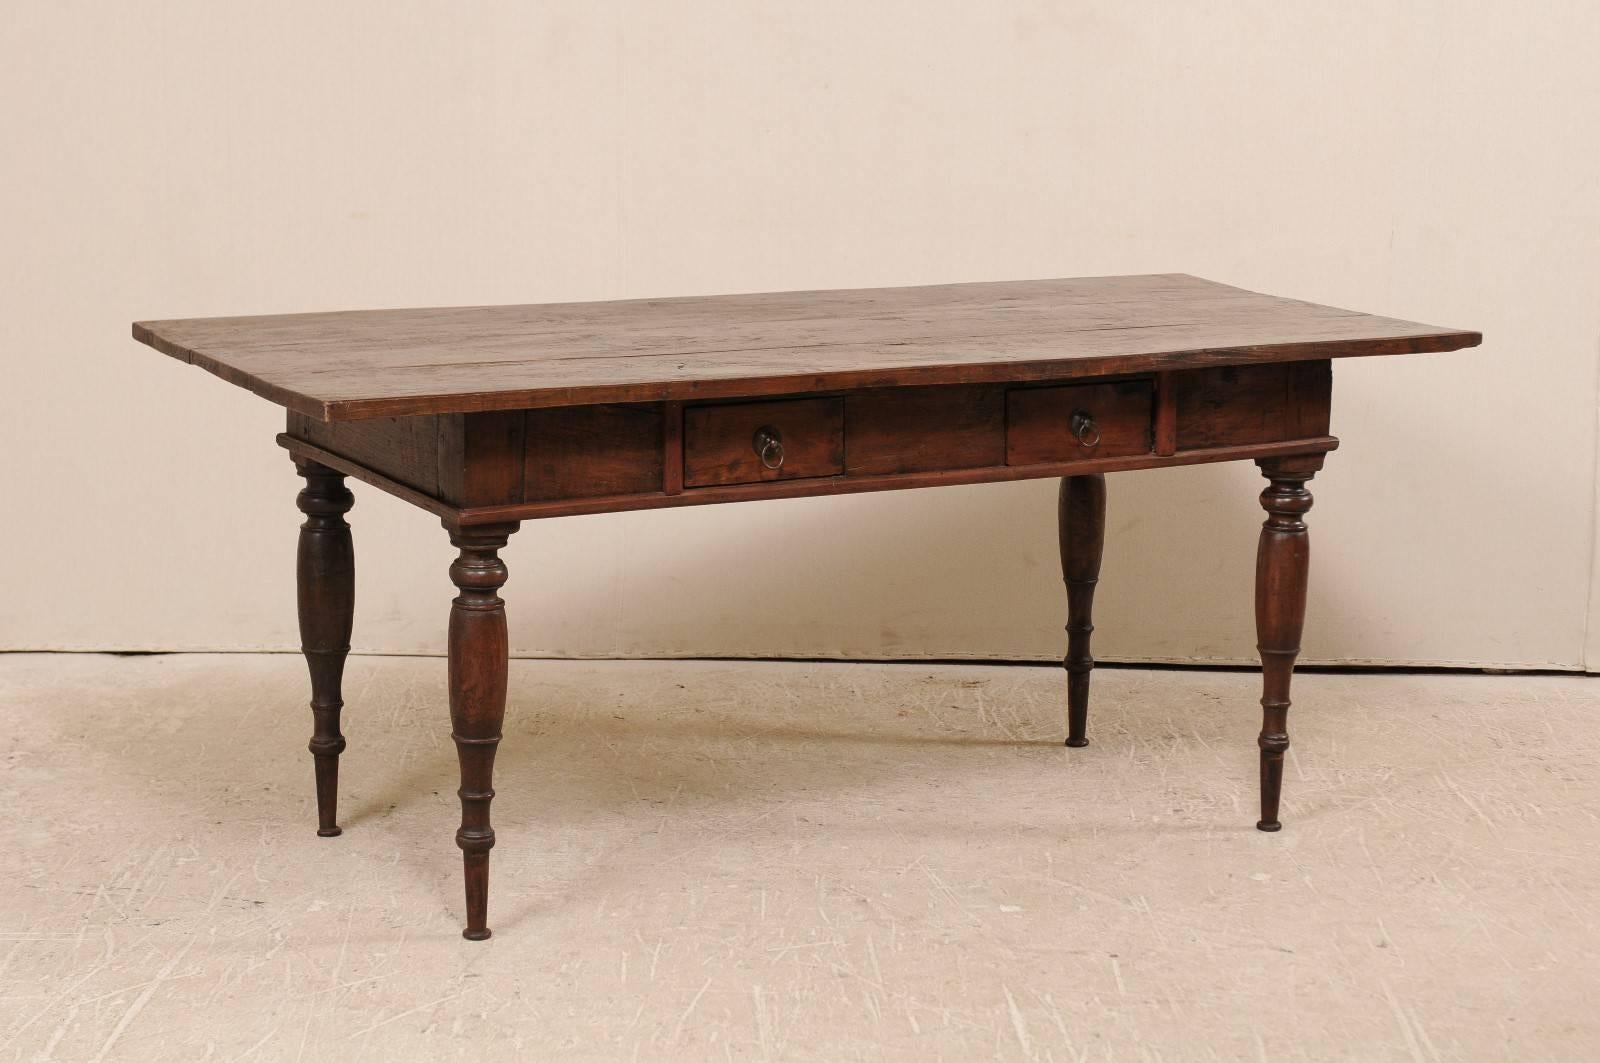 A Brazilian table from the early 20th century. This antique Brazilian table features two small drawers on one side and beautifully turned legs. Each drawer is decorated with simple ring pulls. The wood is a nice rich brown. This table has a deep